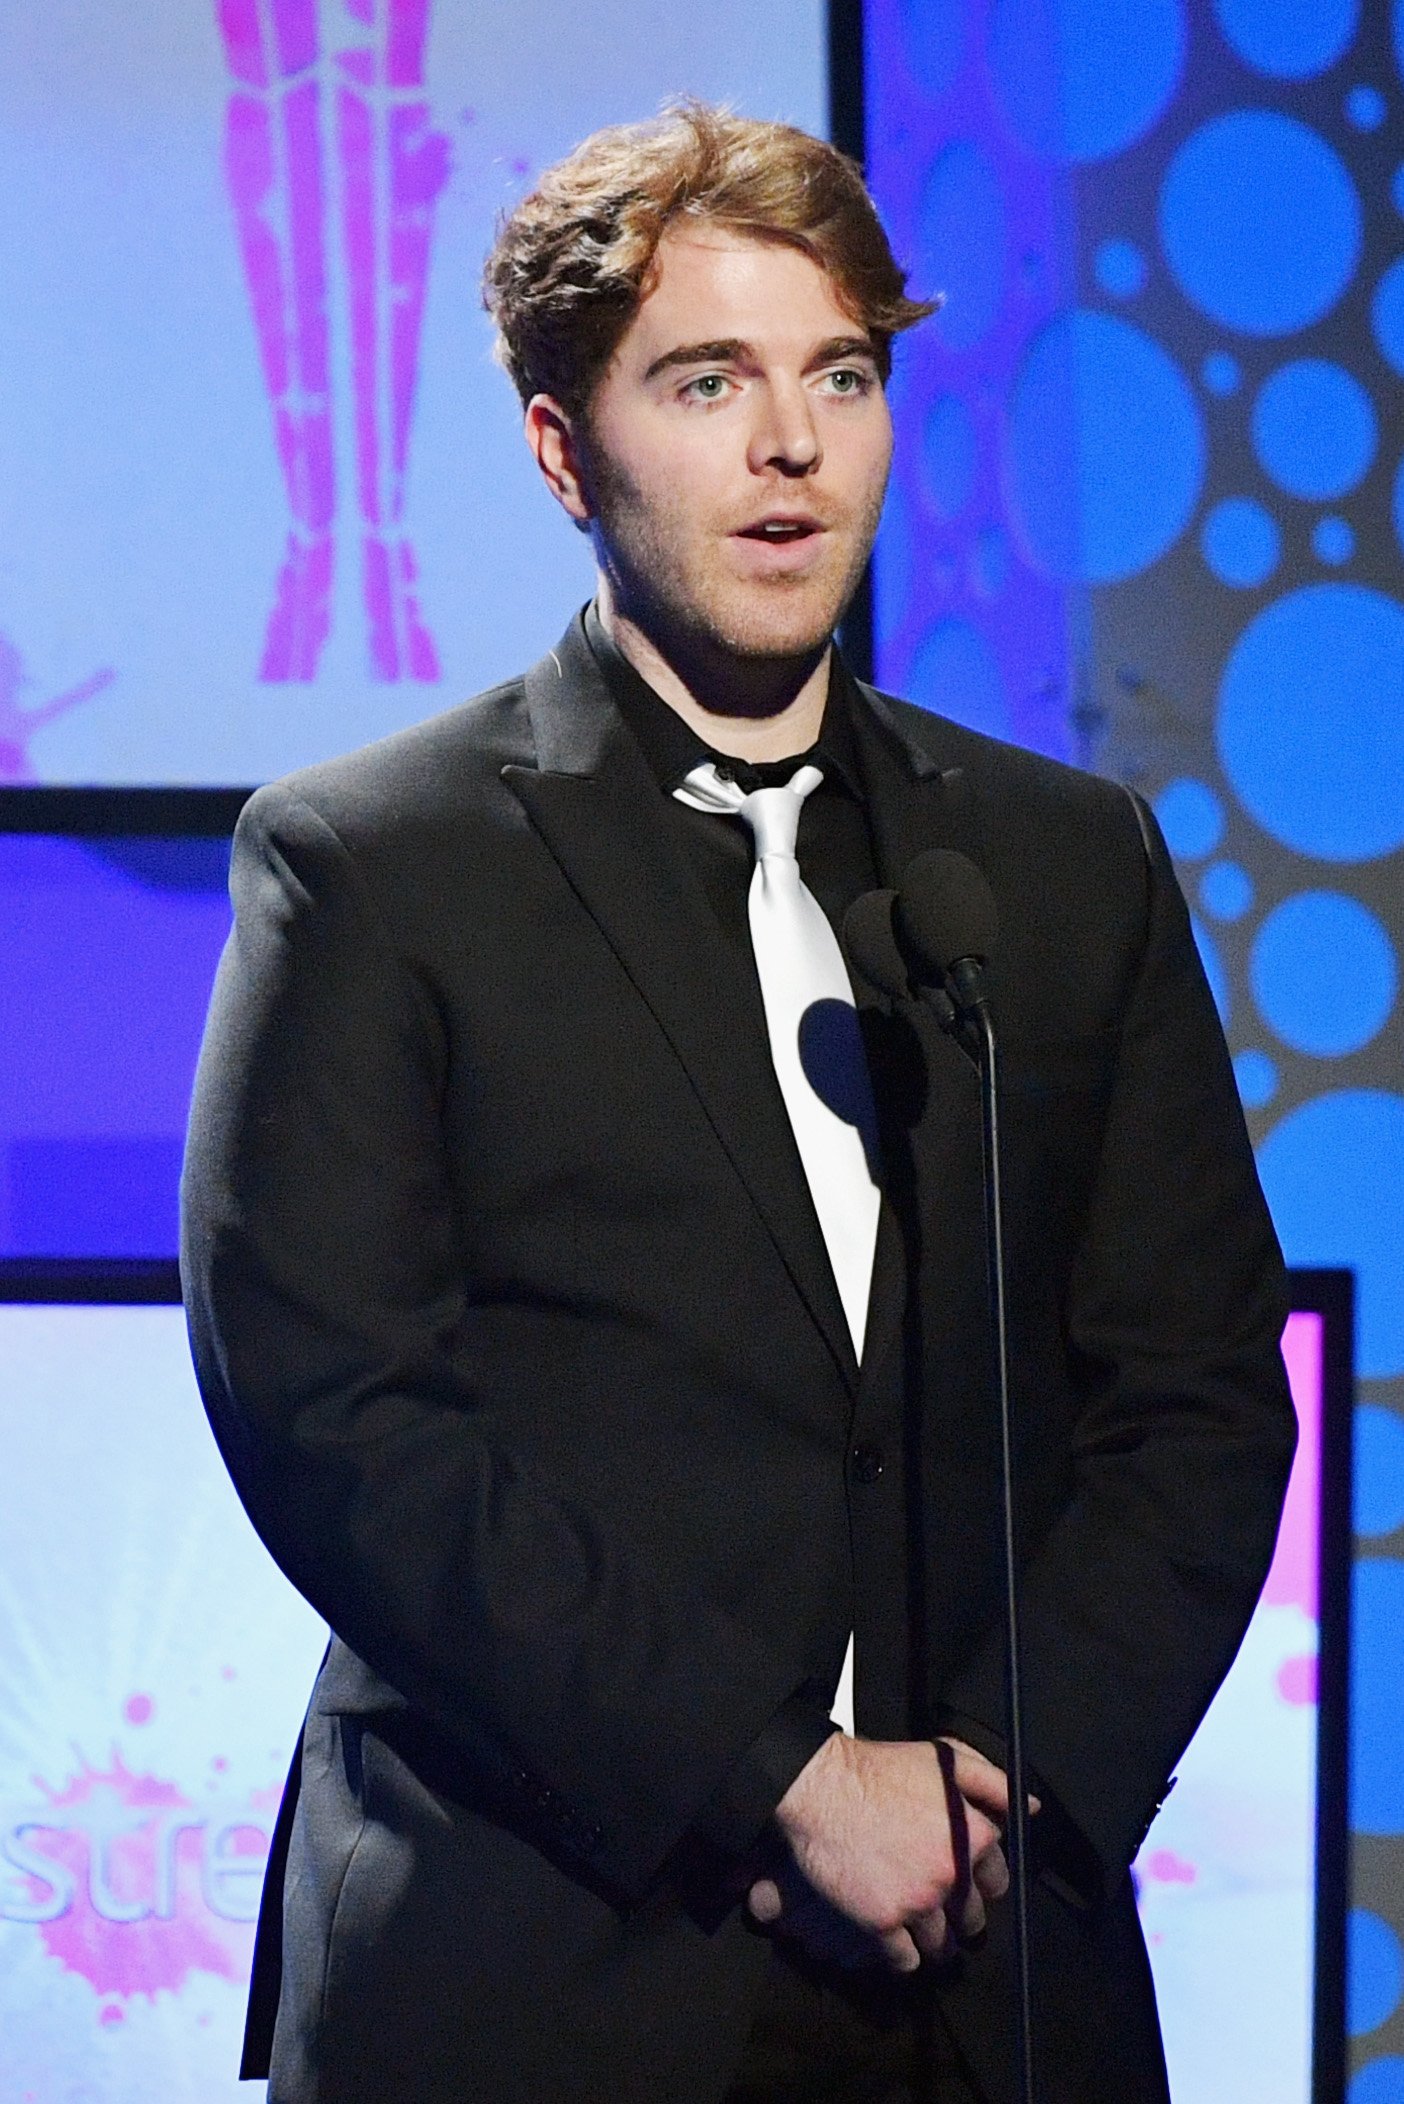 Shane Dawson speaks onstage during a tribute to the late Christina Grimmie the 6th annual Streamy Awards